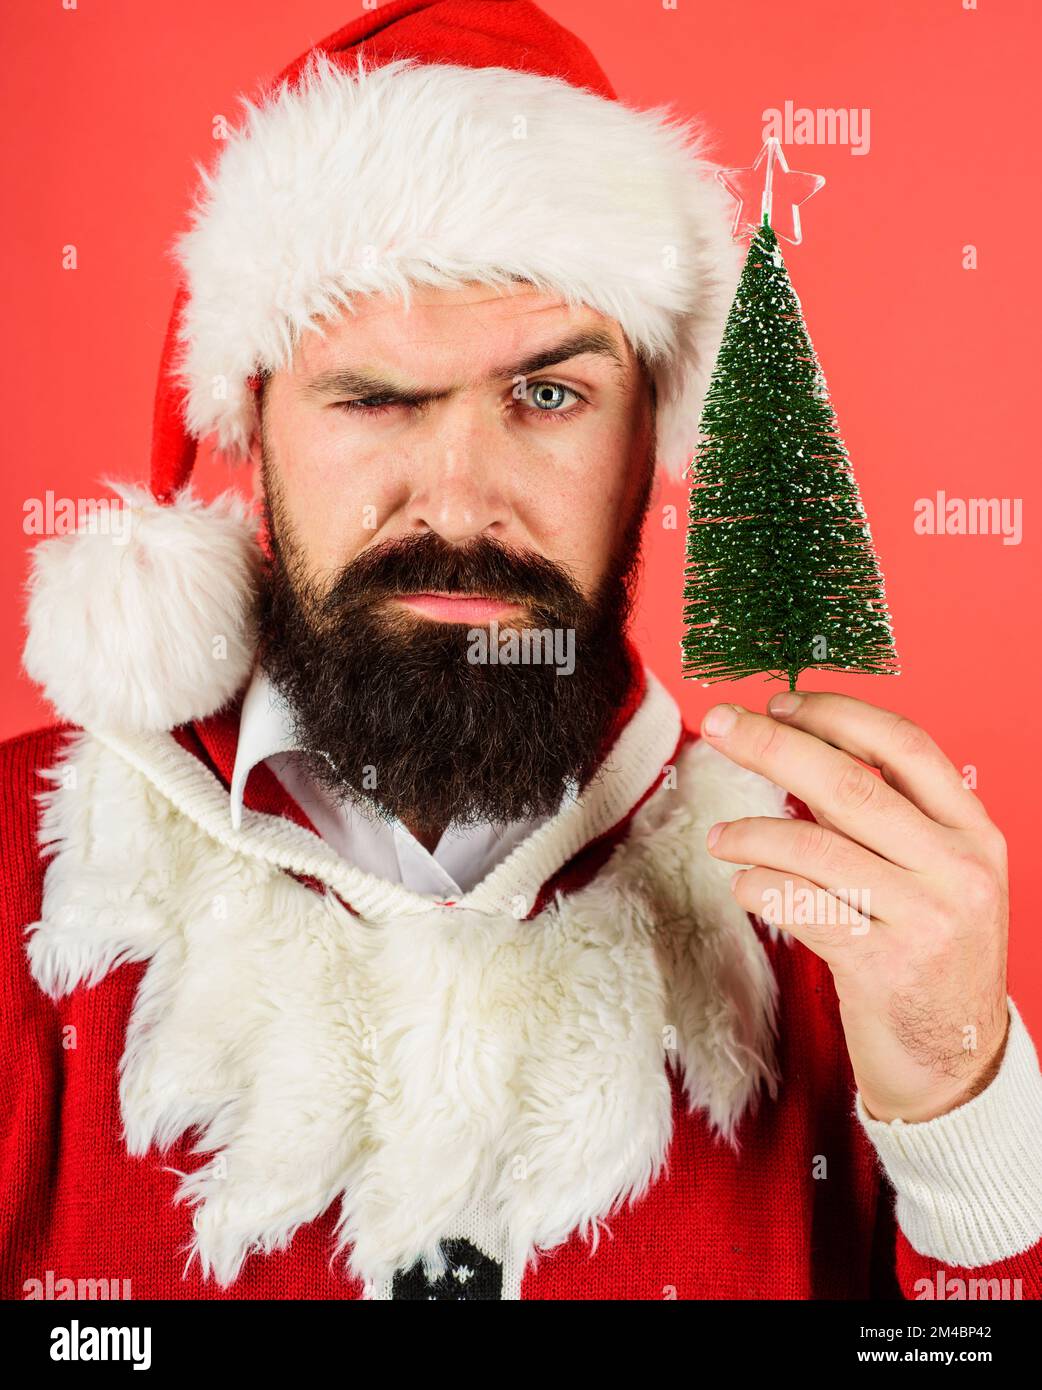 Christmas celebration. Serious Santa Claus with small fir-tree. Winter holidays. Happy New Year. Stock Photo